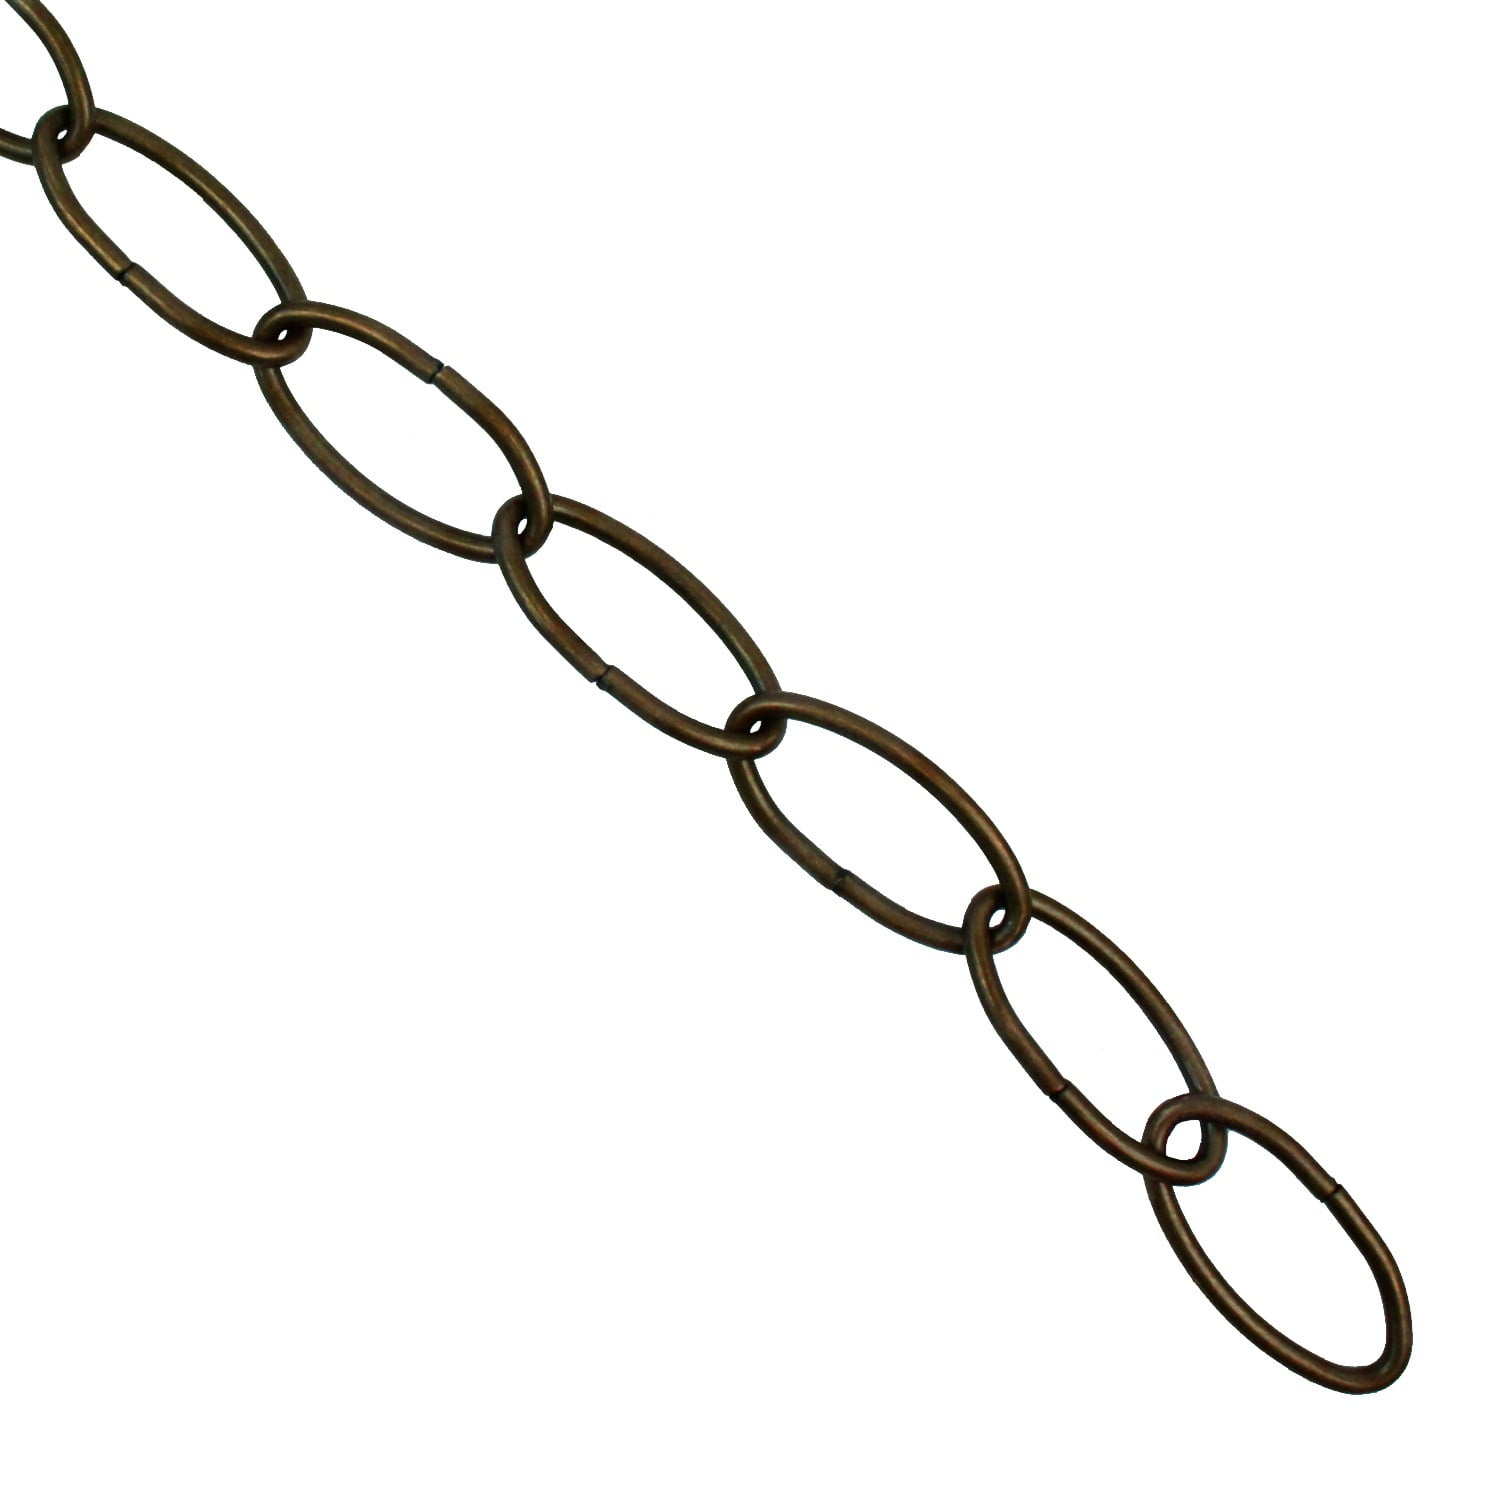 Chain Extension for Hanging Baskets, Planters, Oil Rubbed Bronze, 36 inches Long, Strong Hold